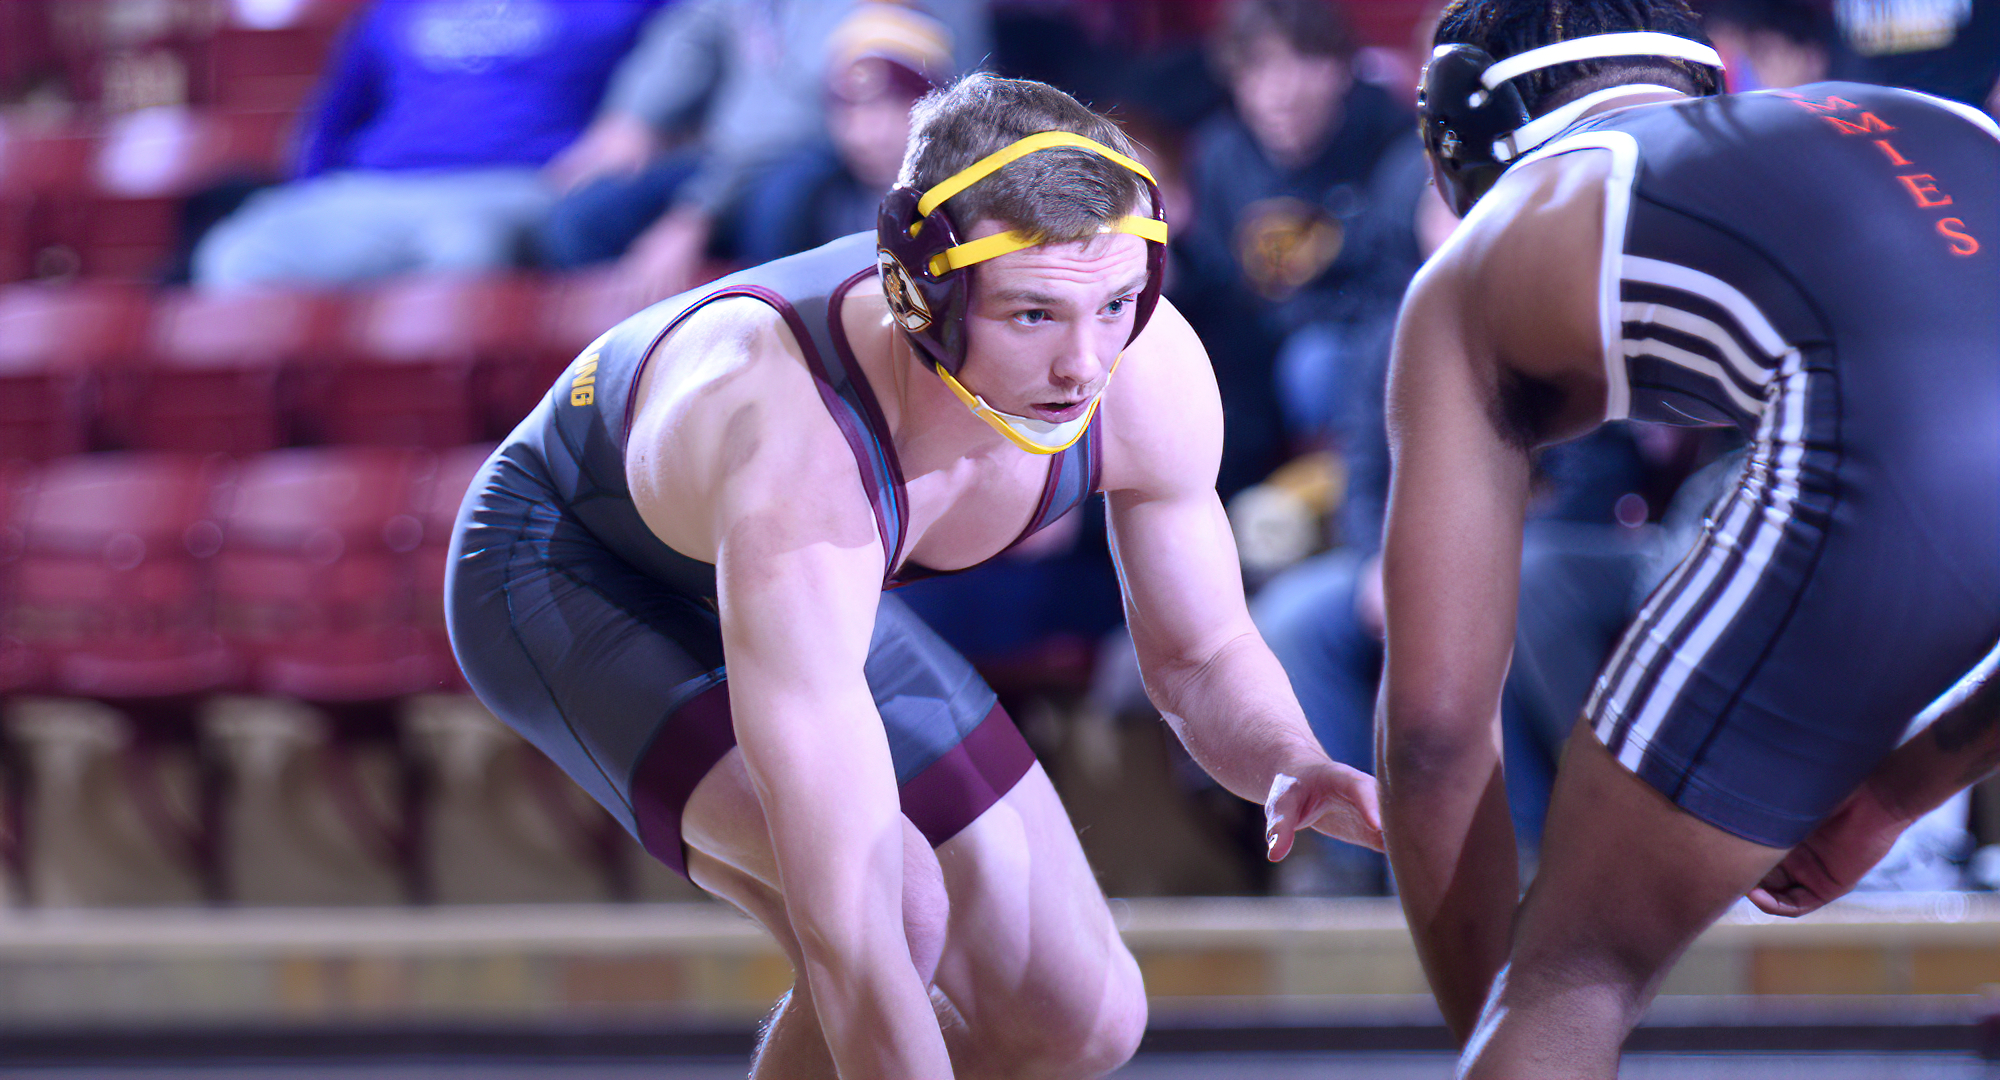 Senior Cade Lundeen was one of four Cobber wrestlers to win weight-class titles at the season-opening Jimmie Open. He went 4-0 at 141.